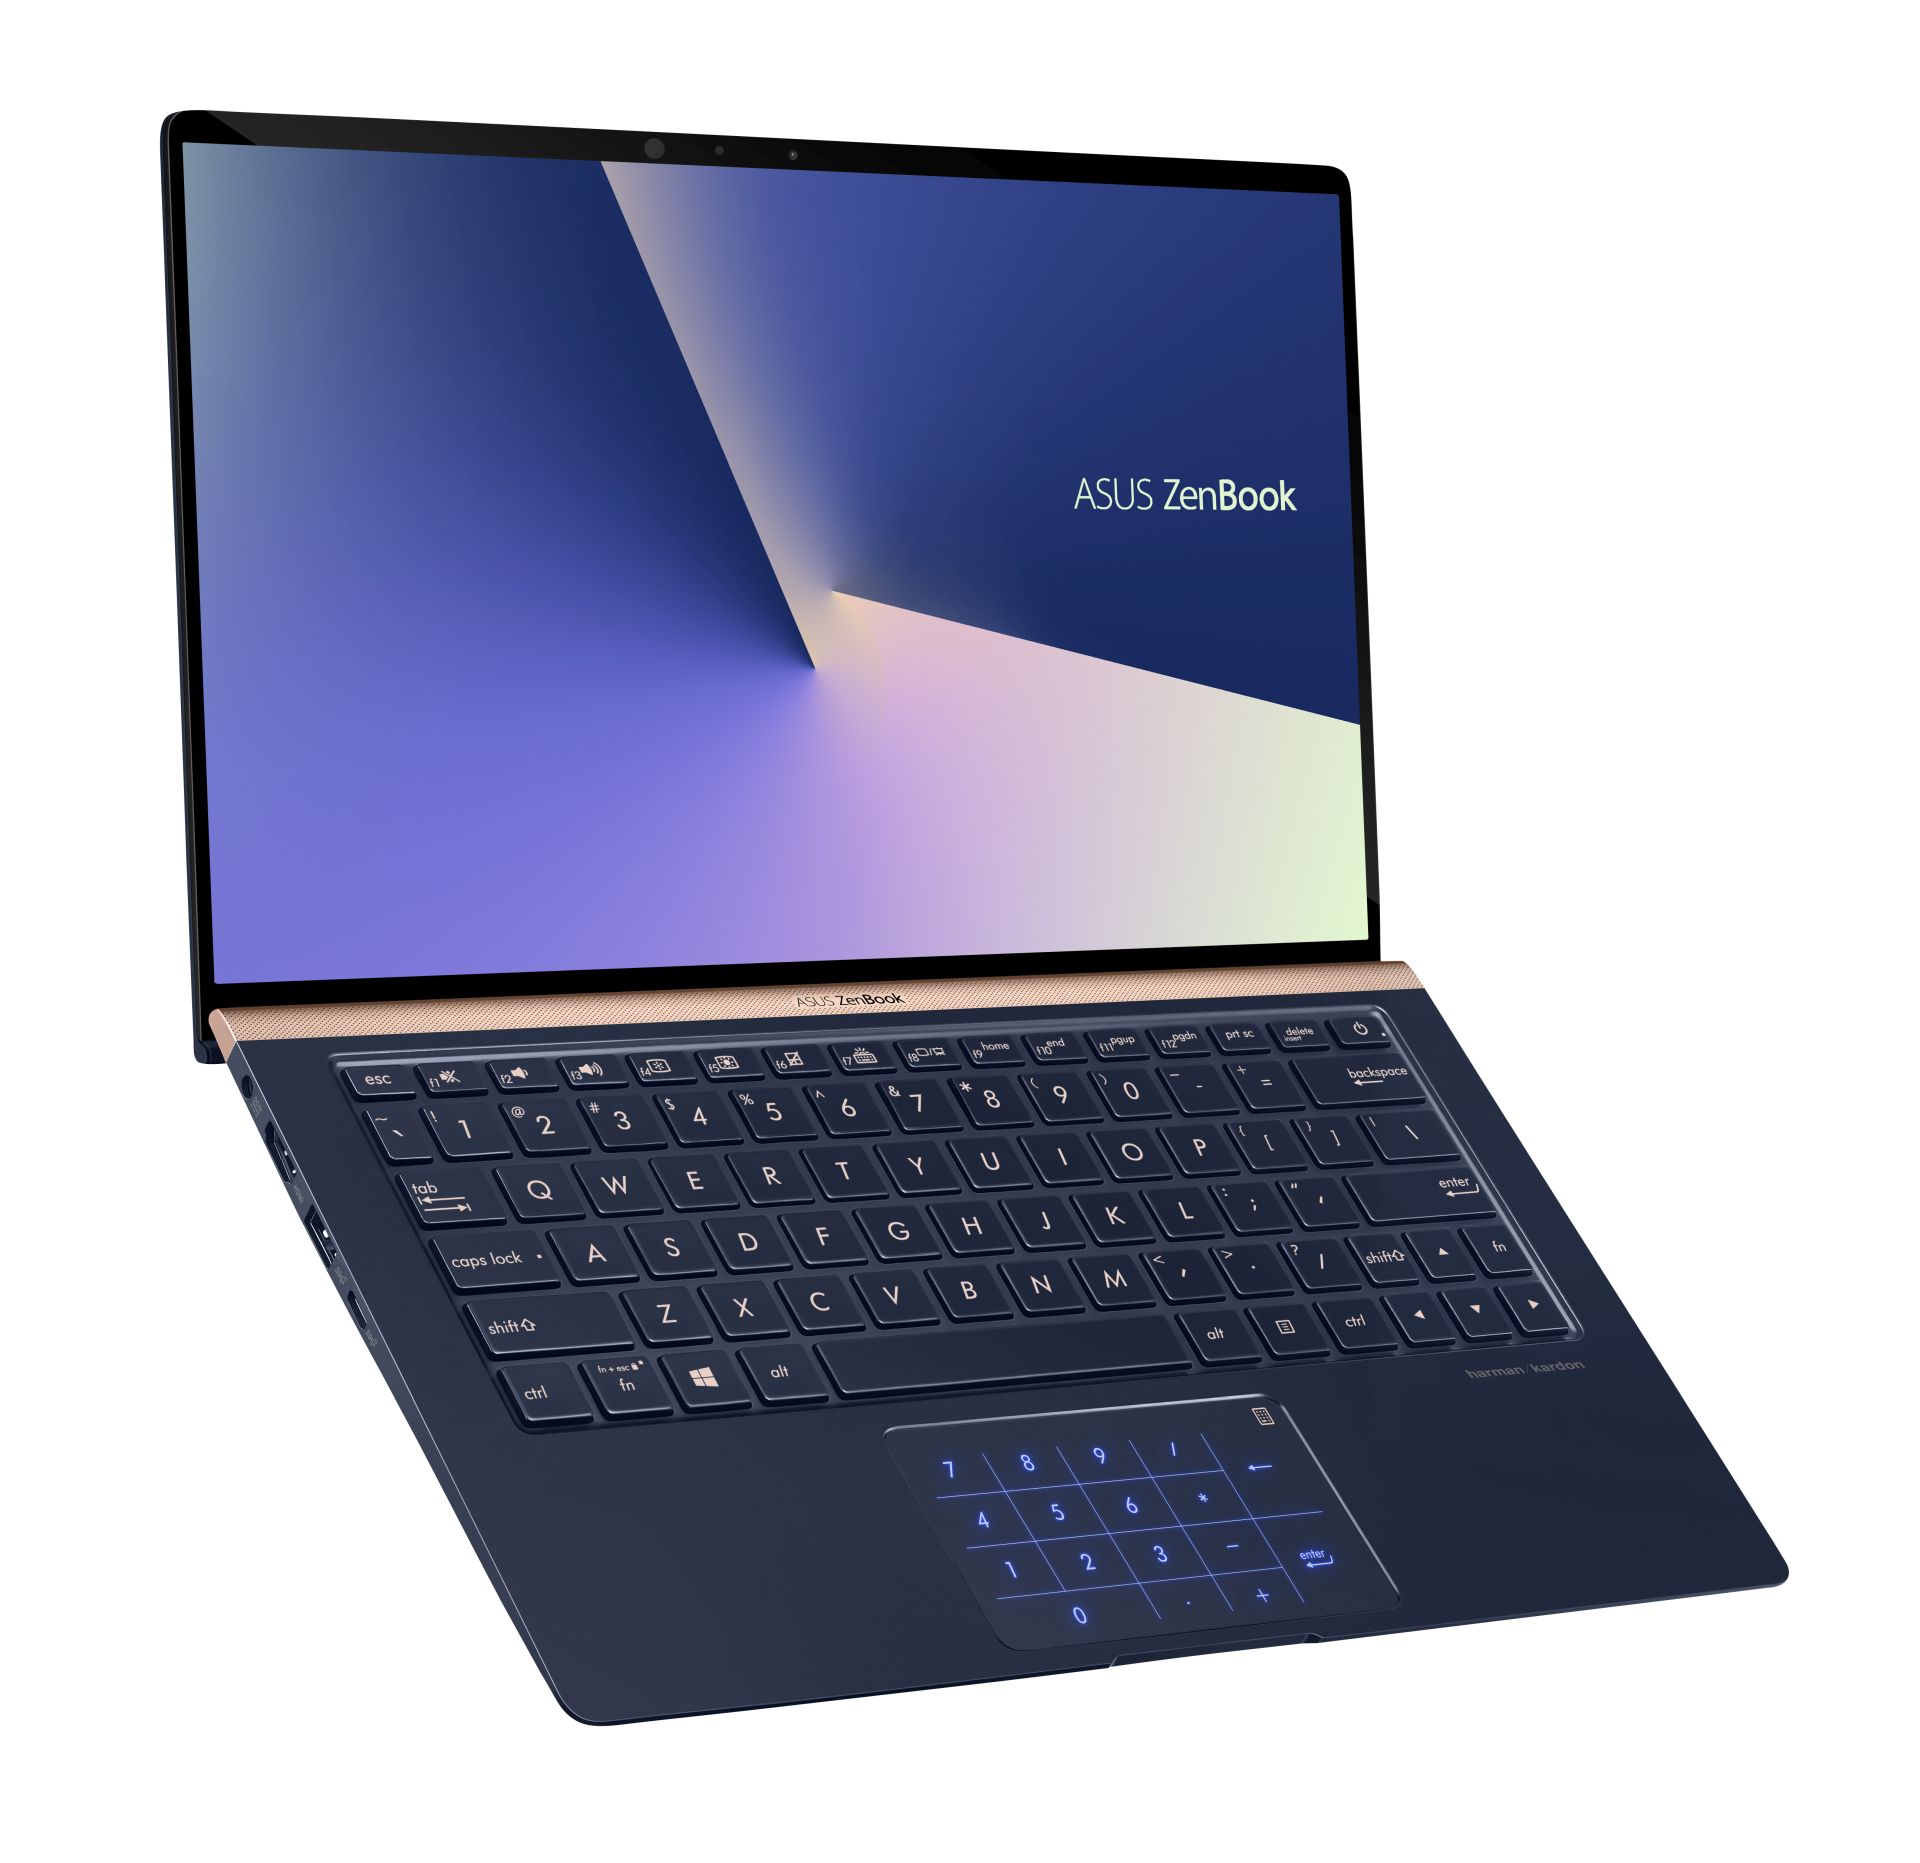 The New Range Of Zenbook Laptops From Asus Are The Best